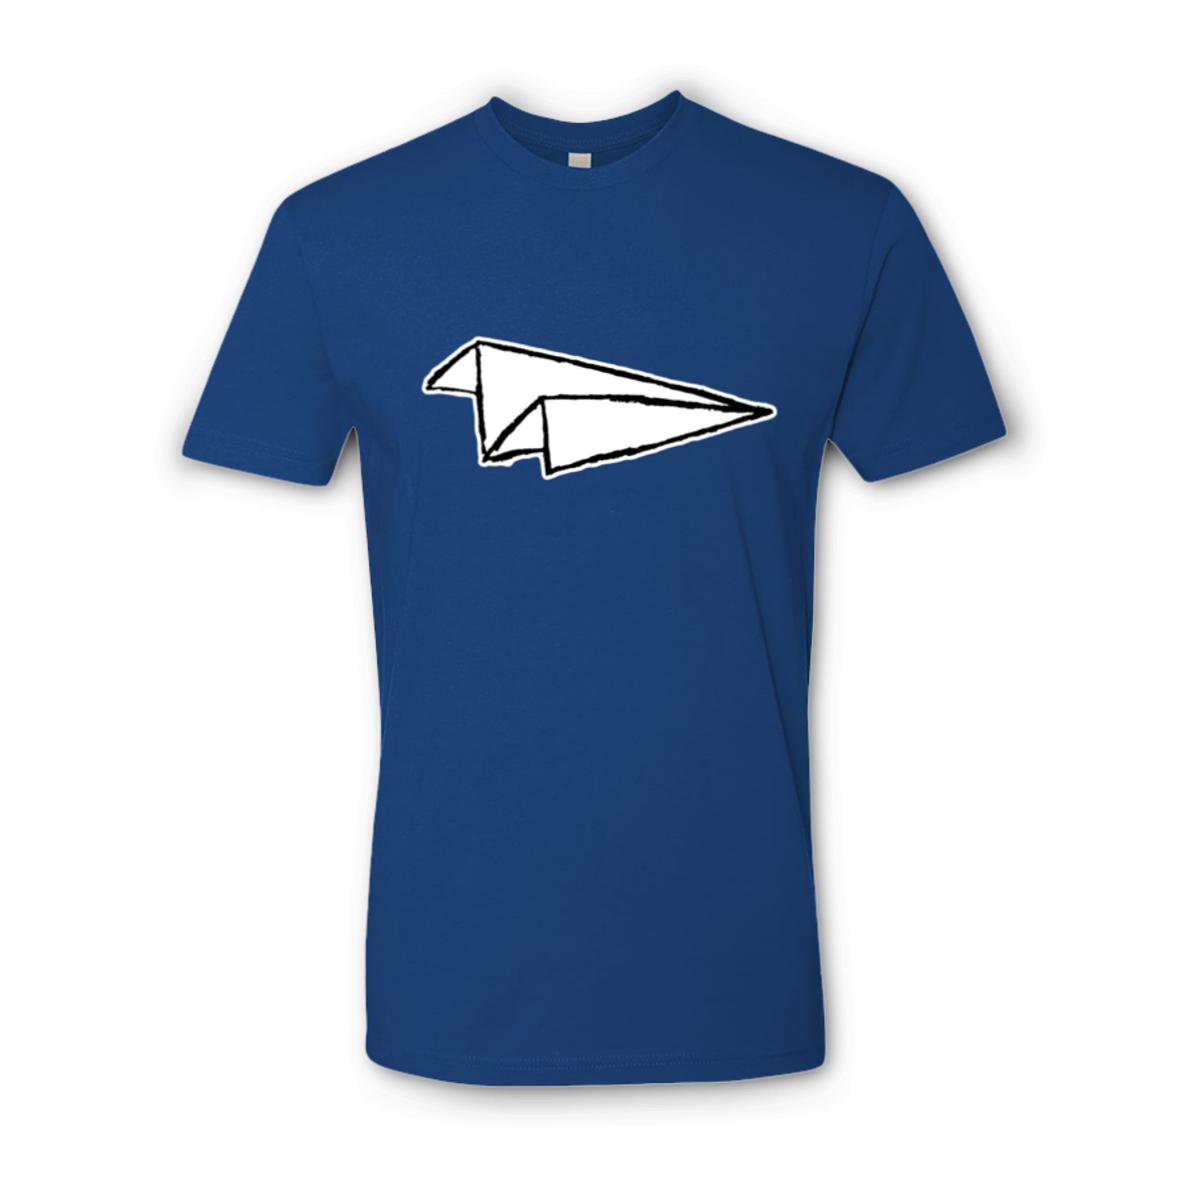 Airplane Sketch Unisex Tee Double Extra Large royal-blue